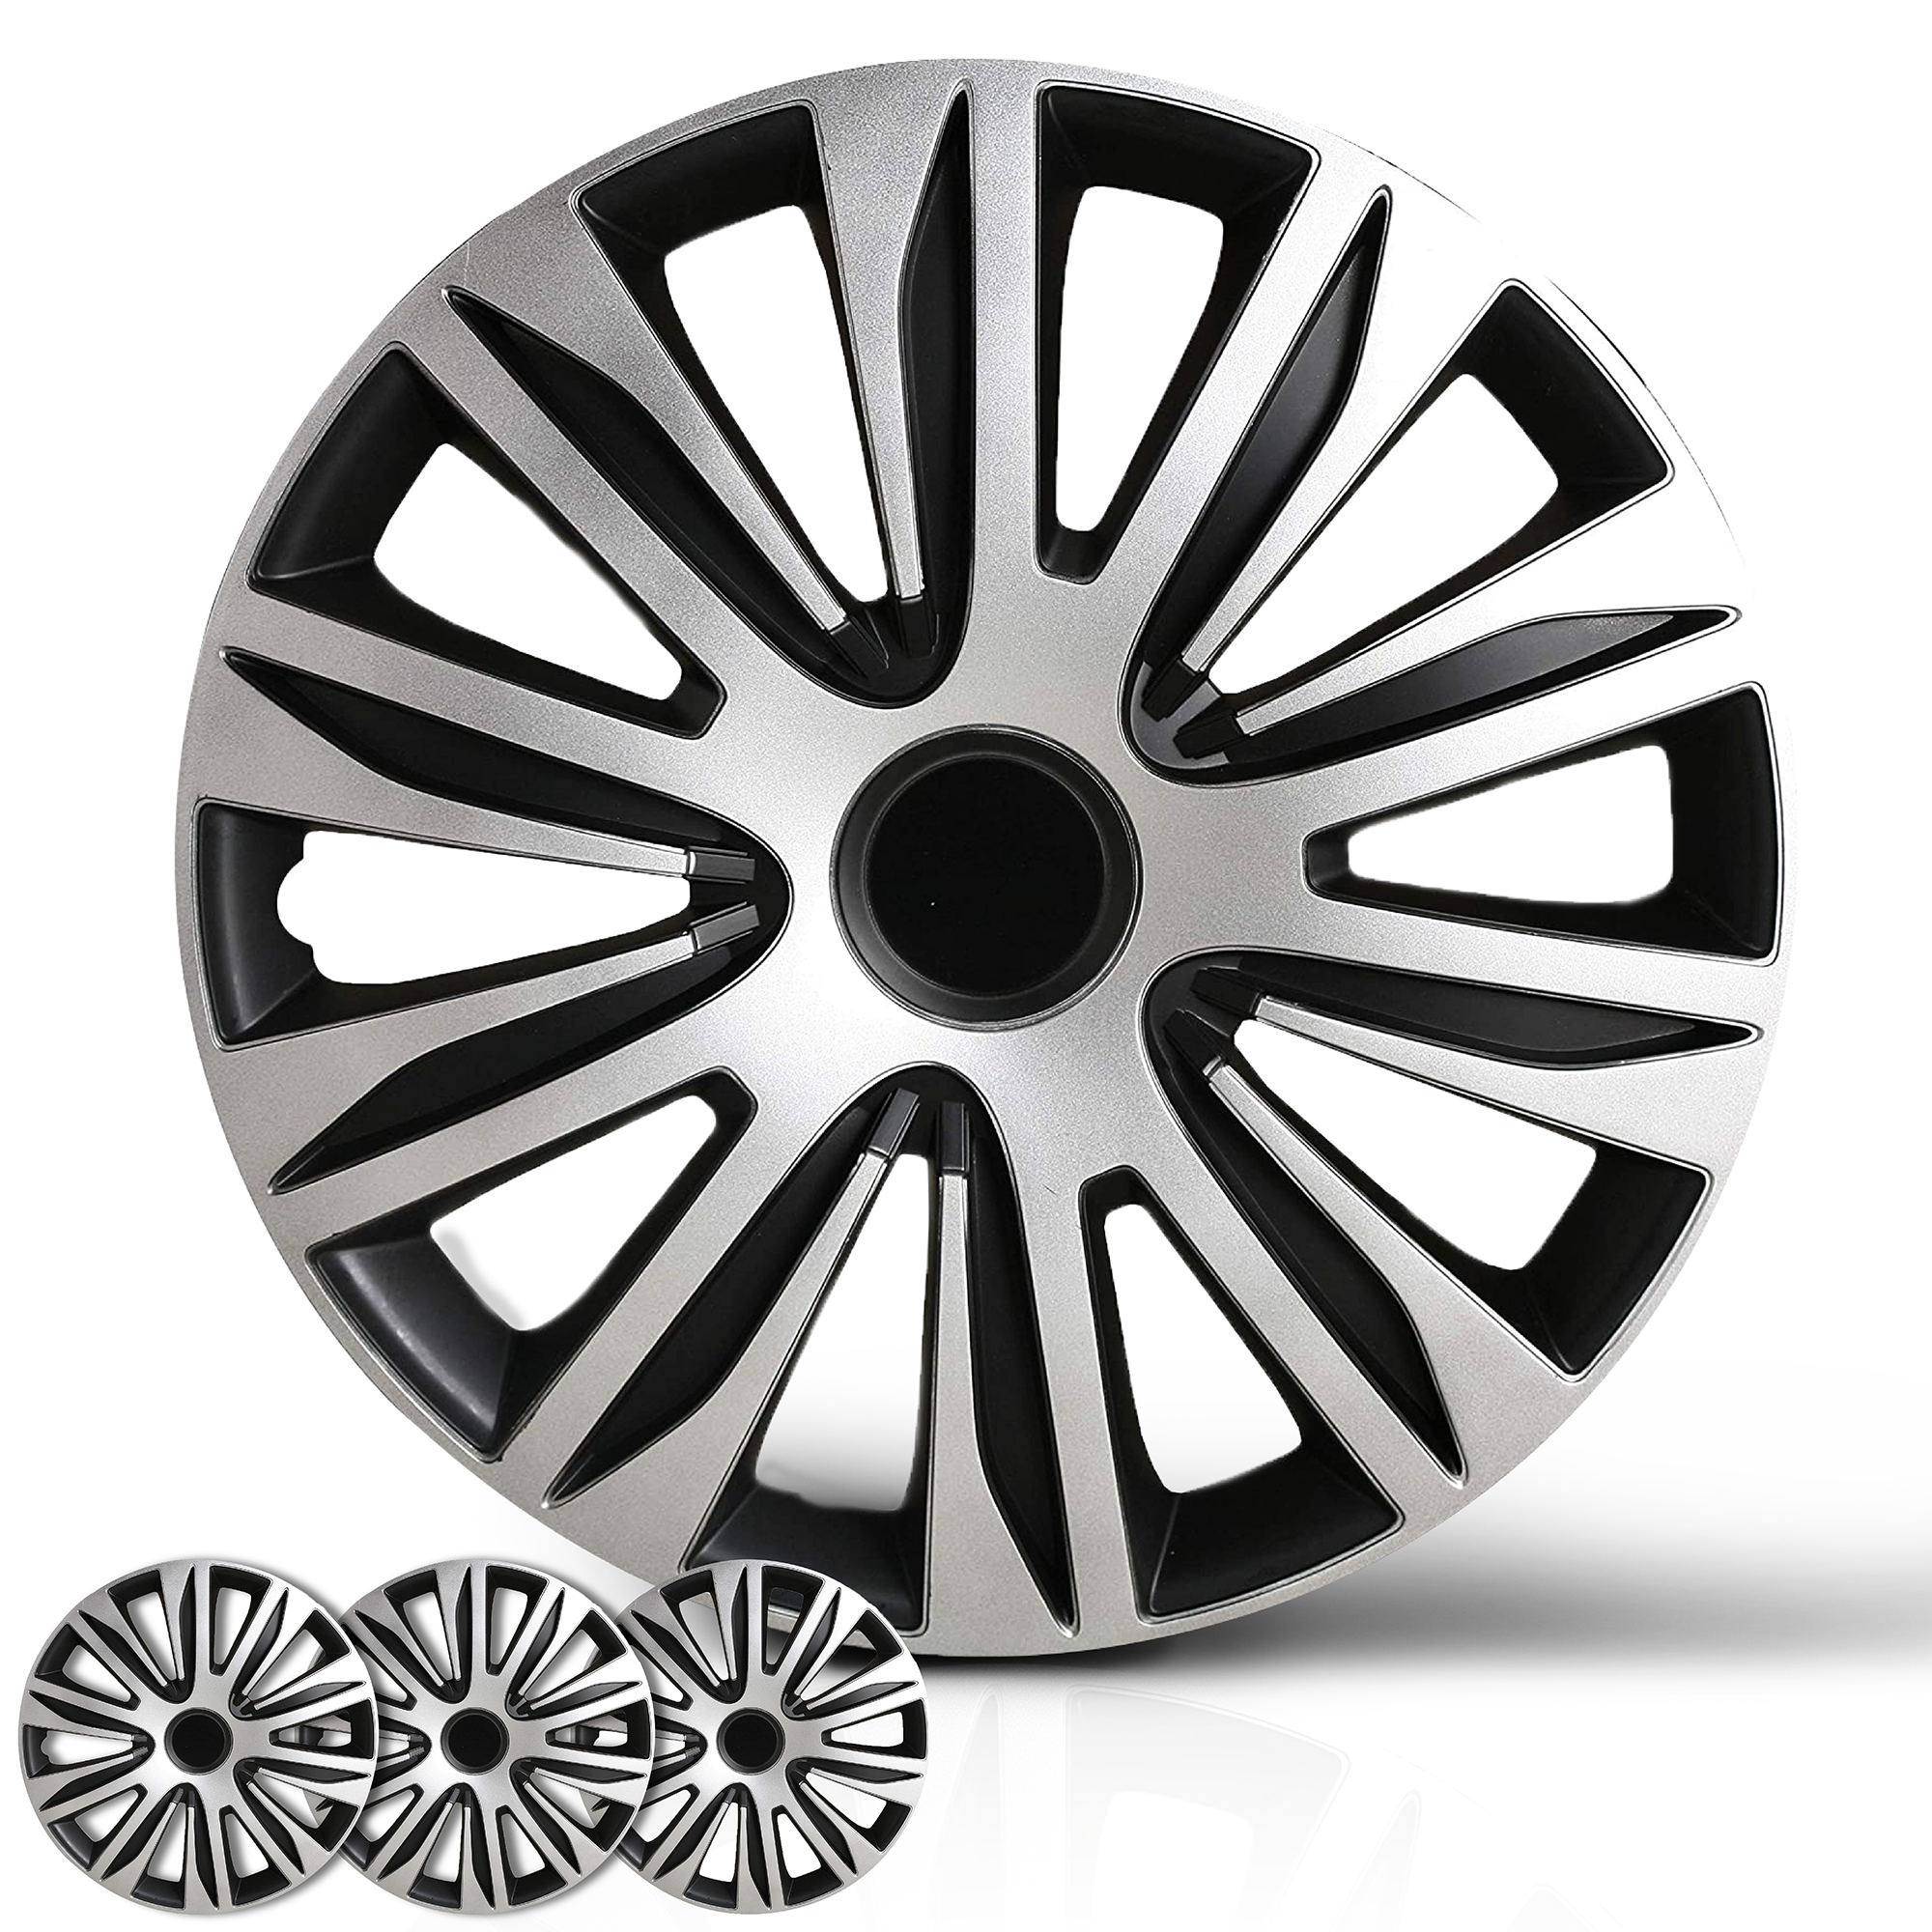 Wheel Cover Kit, 16 Inch Hubcaps Set of Automotive Hub Caps with Universal  Snap-On Retention Rings, 2-Tone ABS Plastic Black and Silver Rim Covers for  All Makes, Models (SG-5083-DP-16)